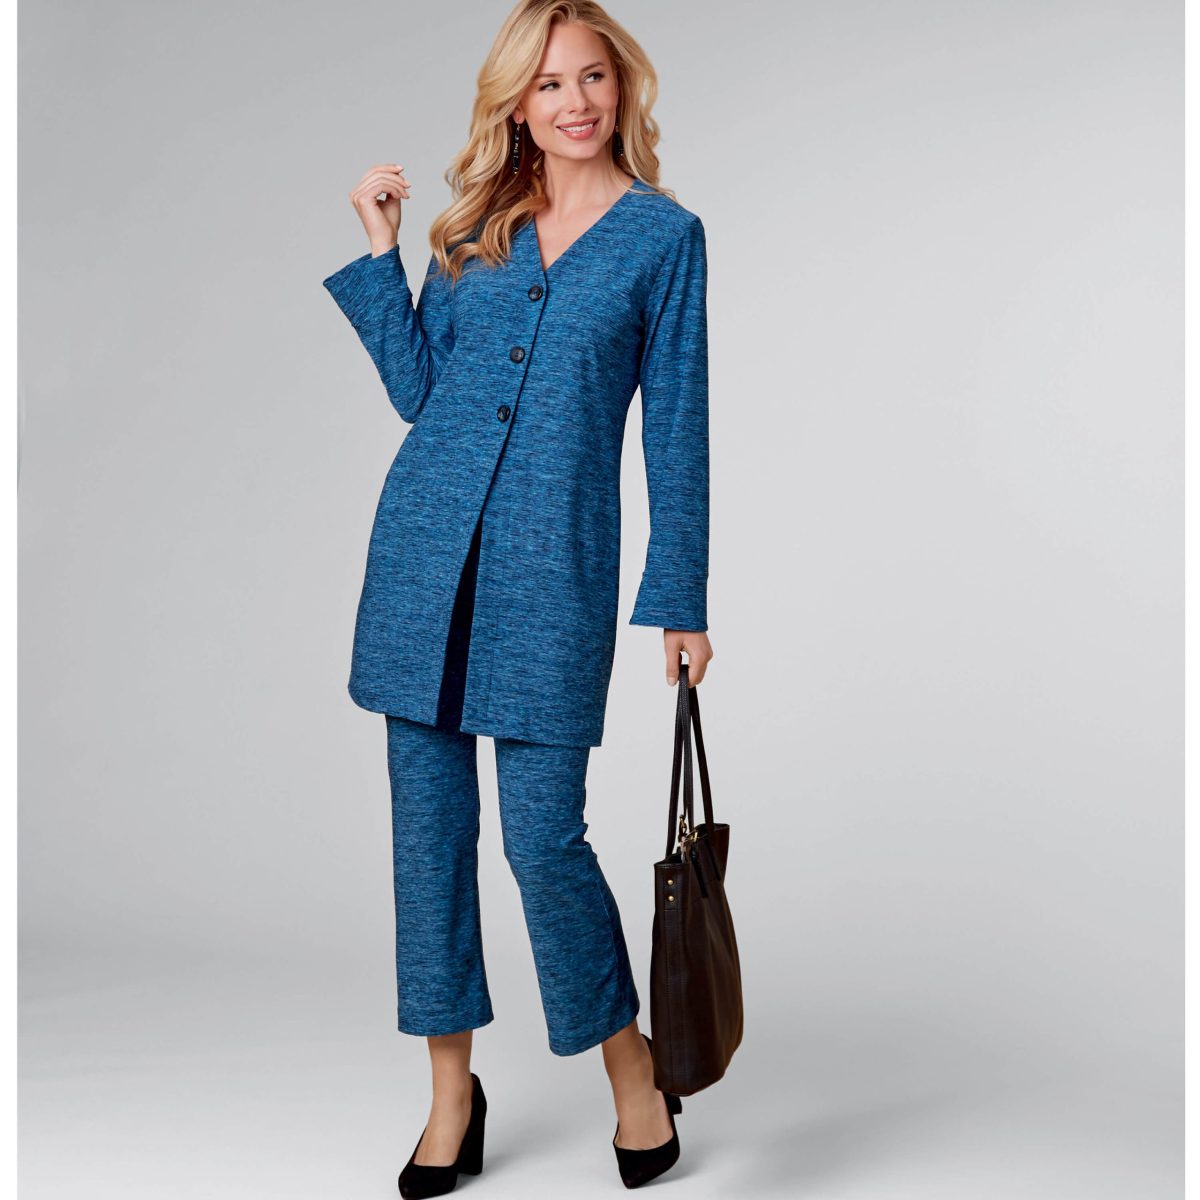 New Look Sewing Pattern N6711 Misses' Cardigan Jacket and Trousers